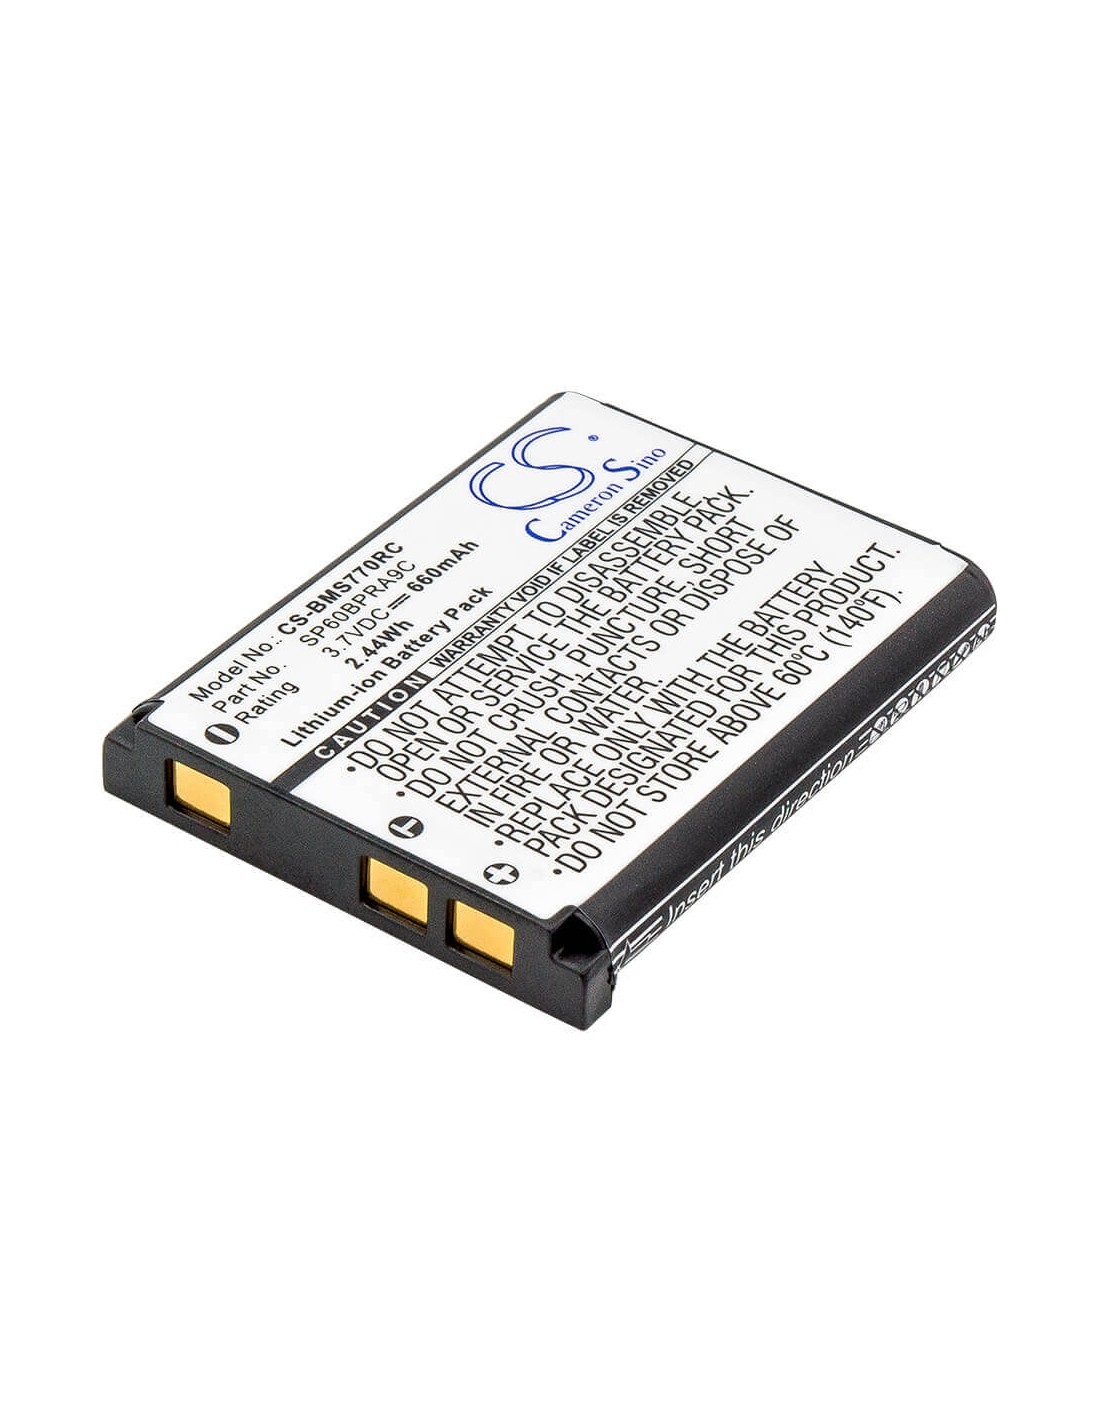 Battery for Sony Bluetooth Laser Mouse, Vgp-bms77 3.7V, 660mAh - 2.44Wh